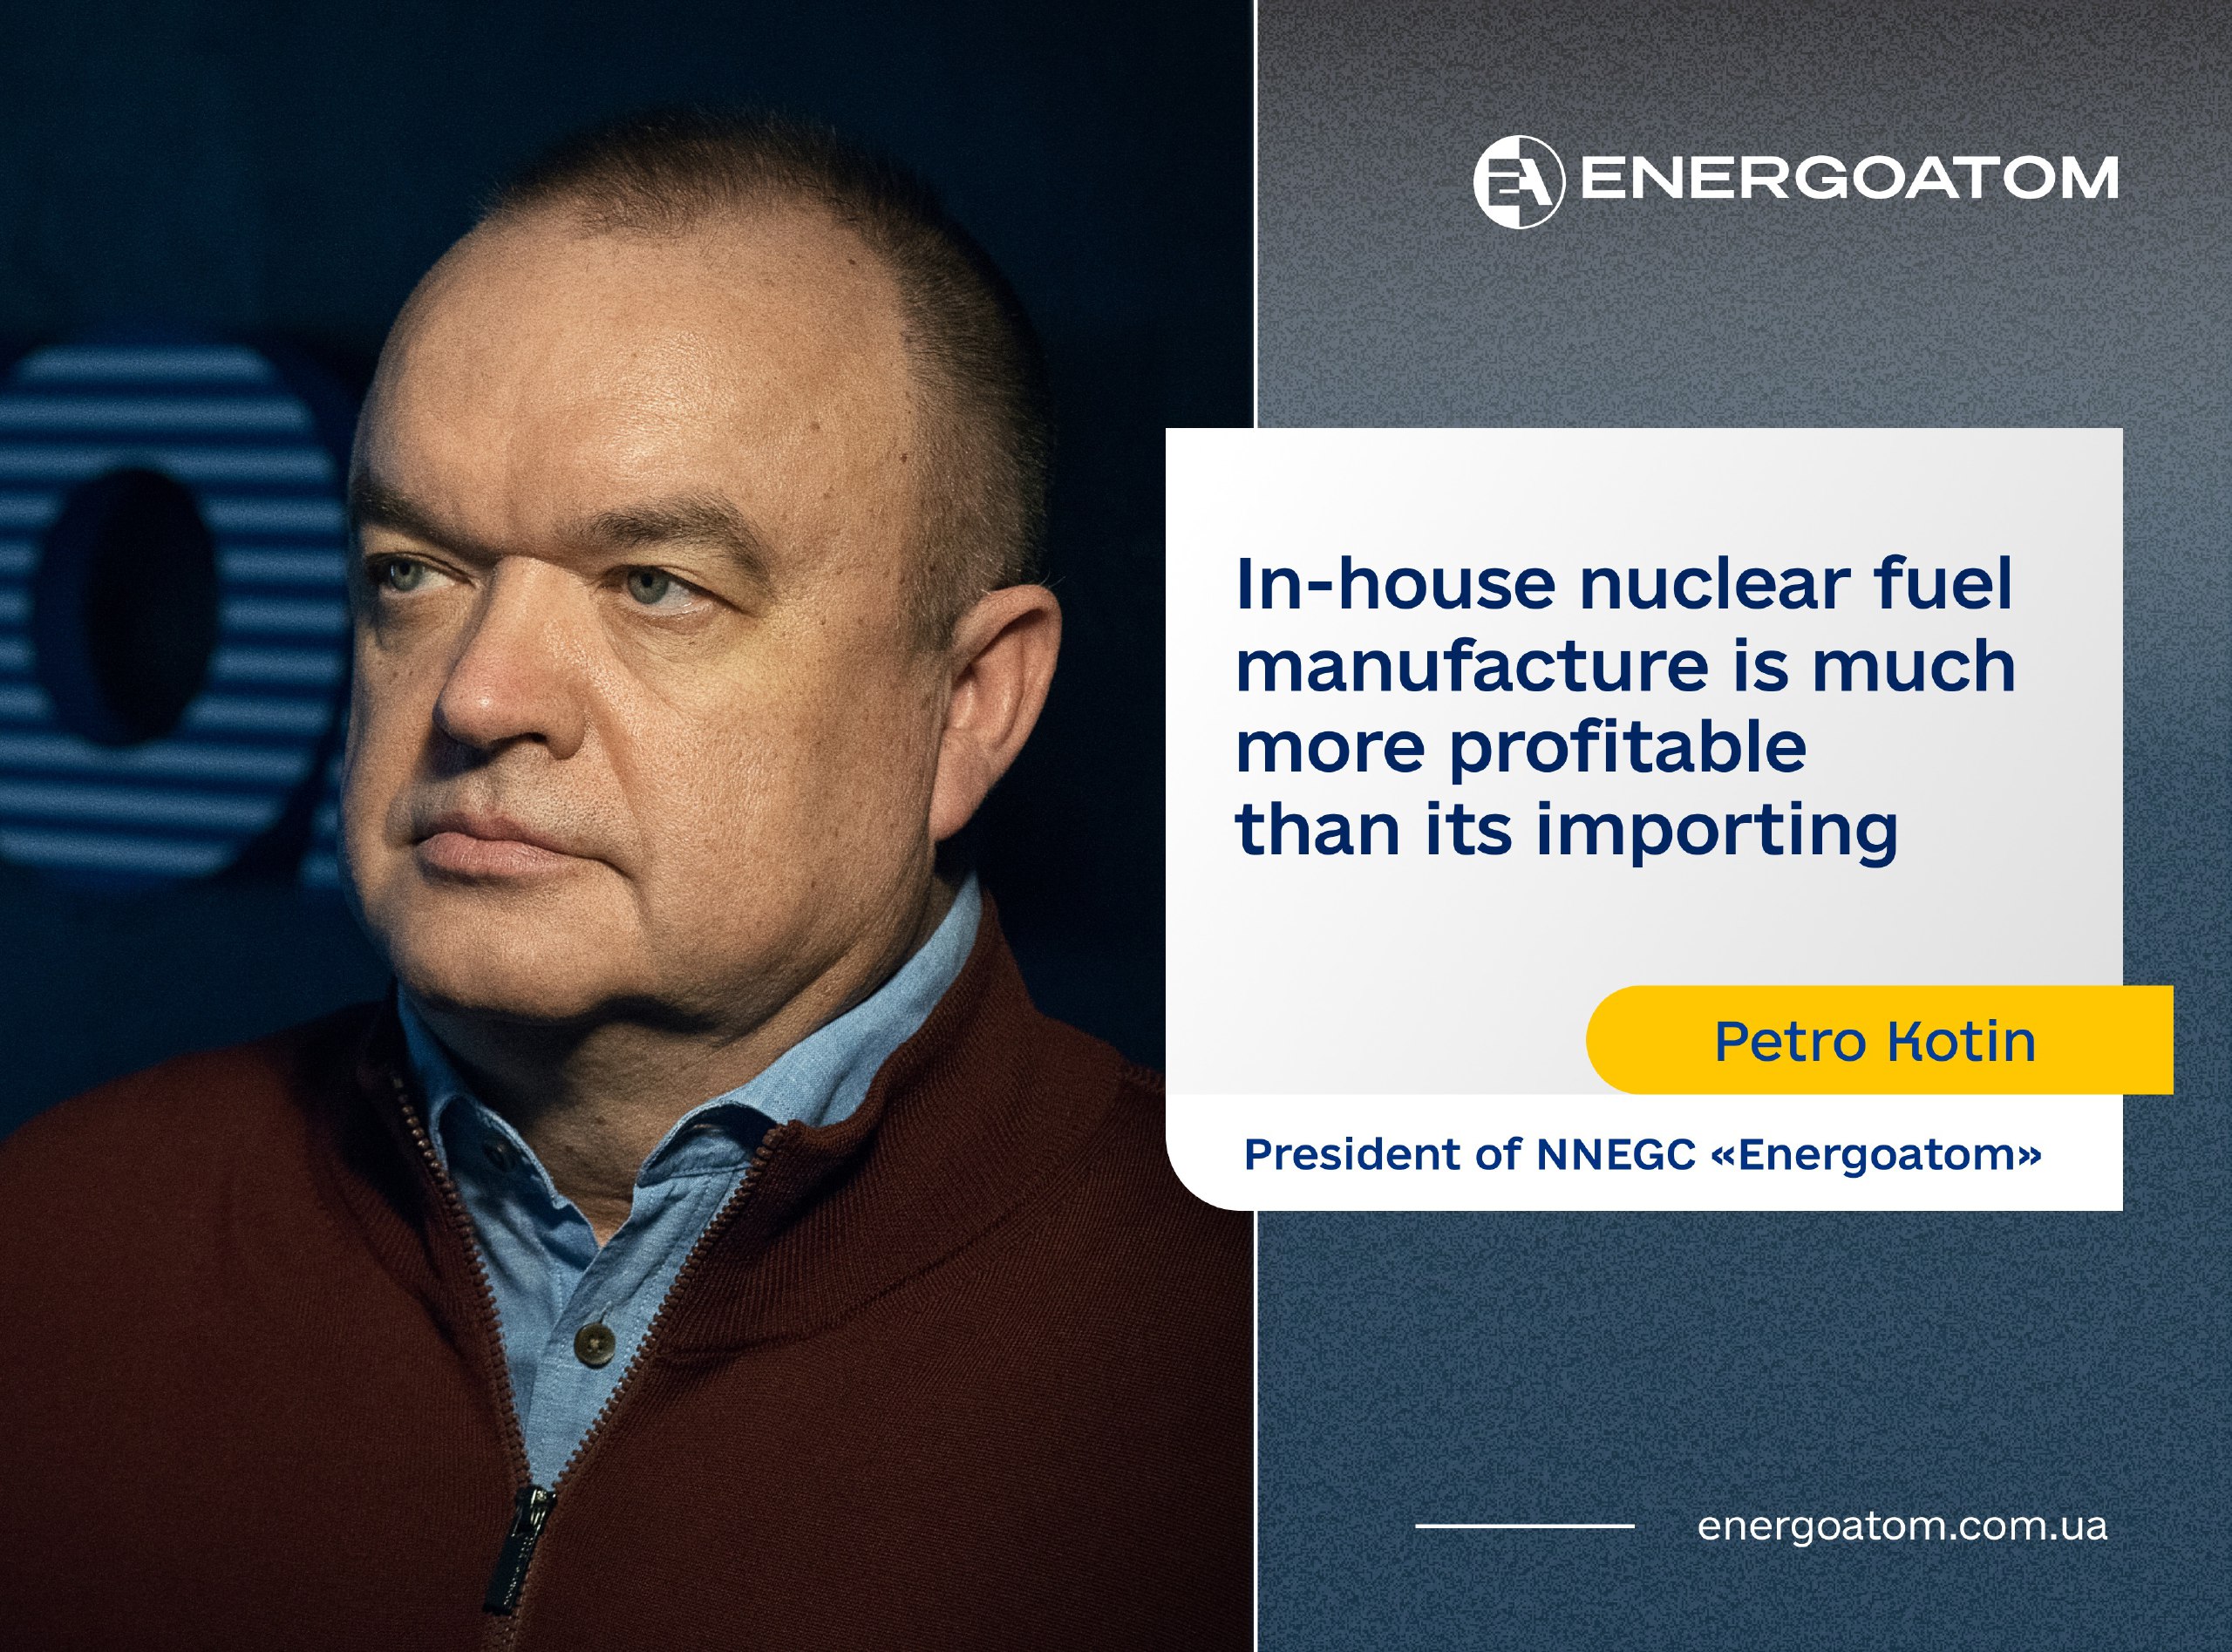 ⚛️⚛️⚛️ Petro Kotin: In-house nuclear